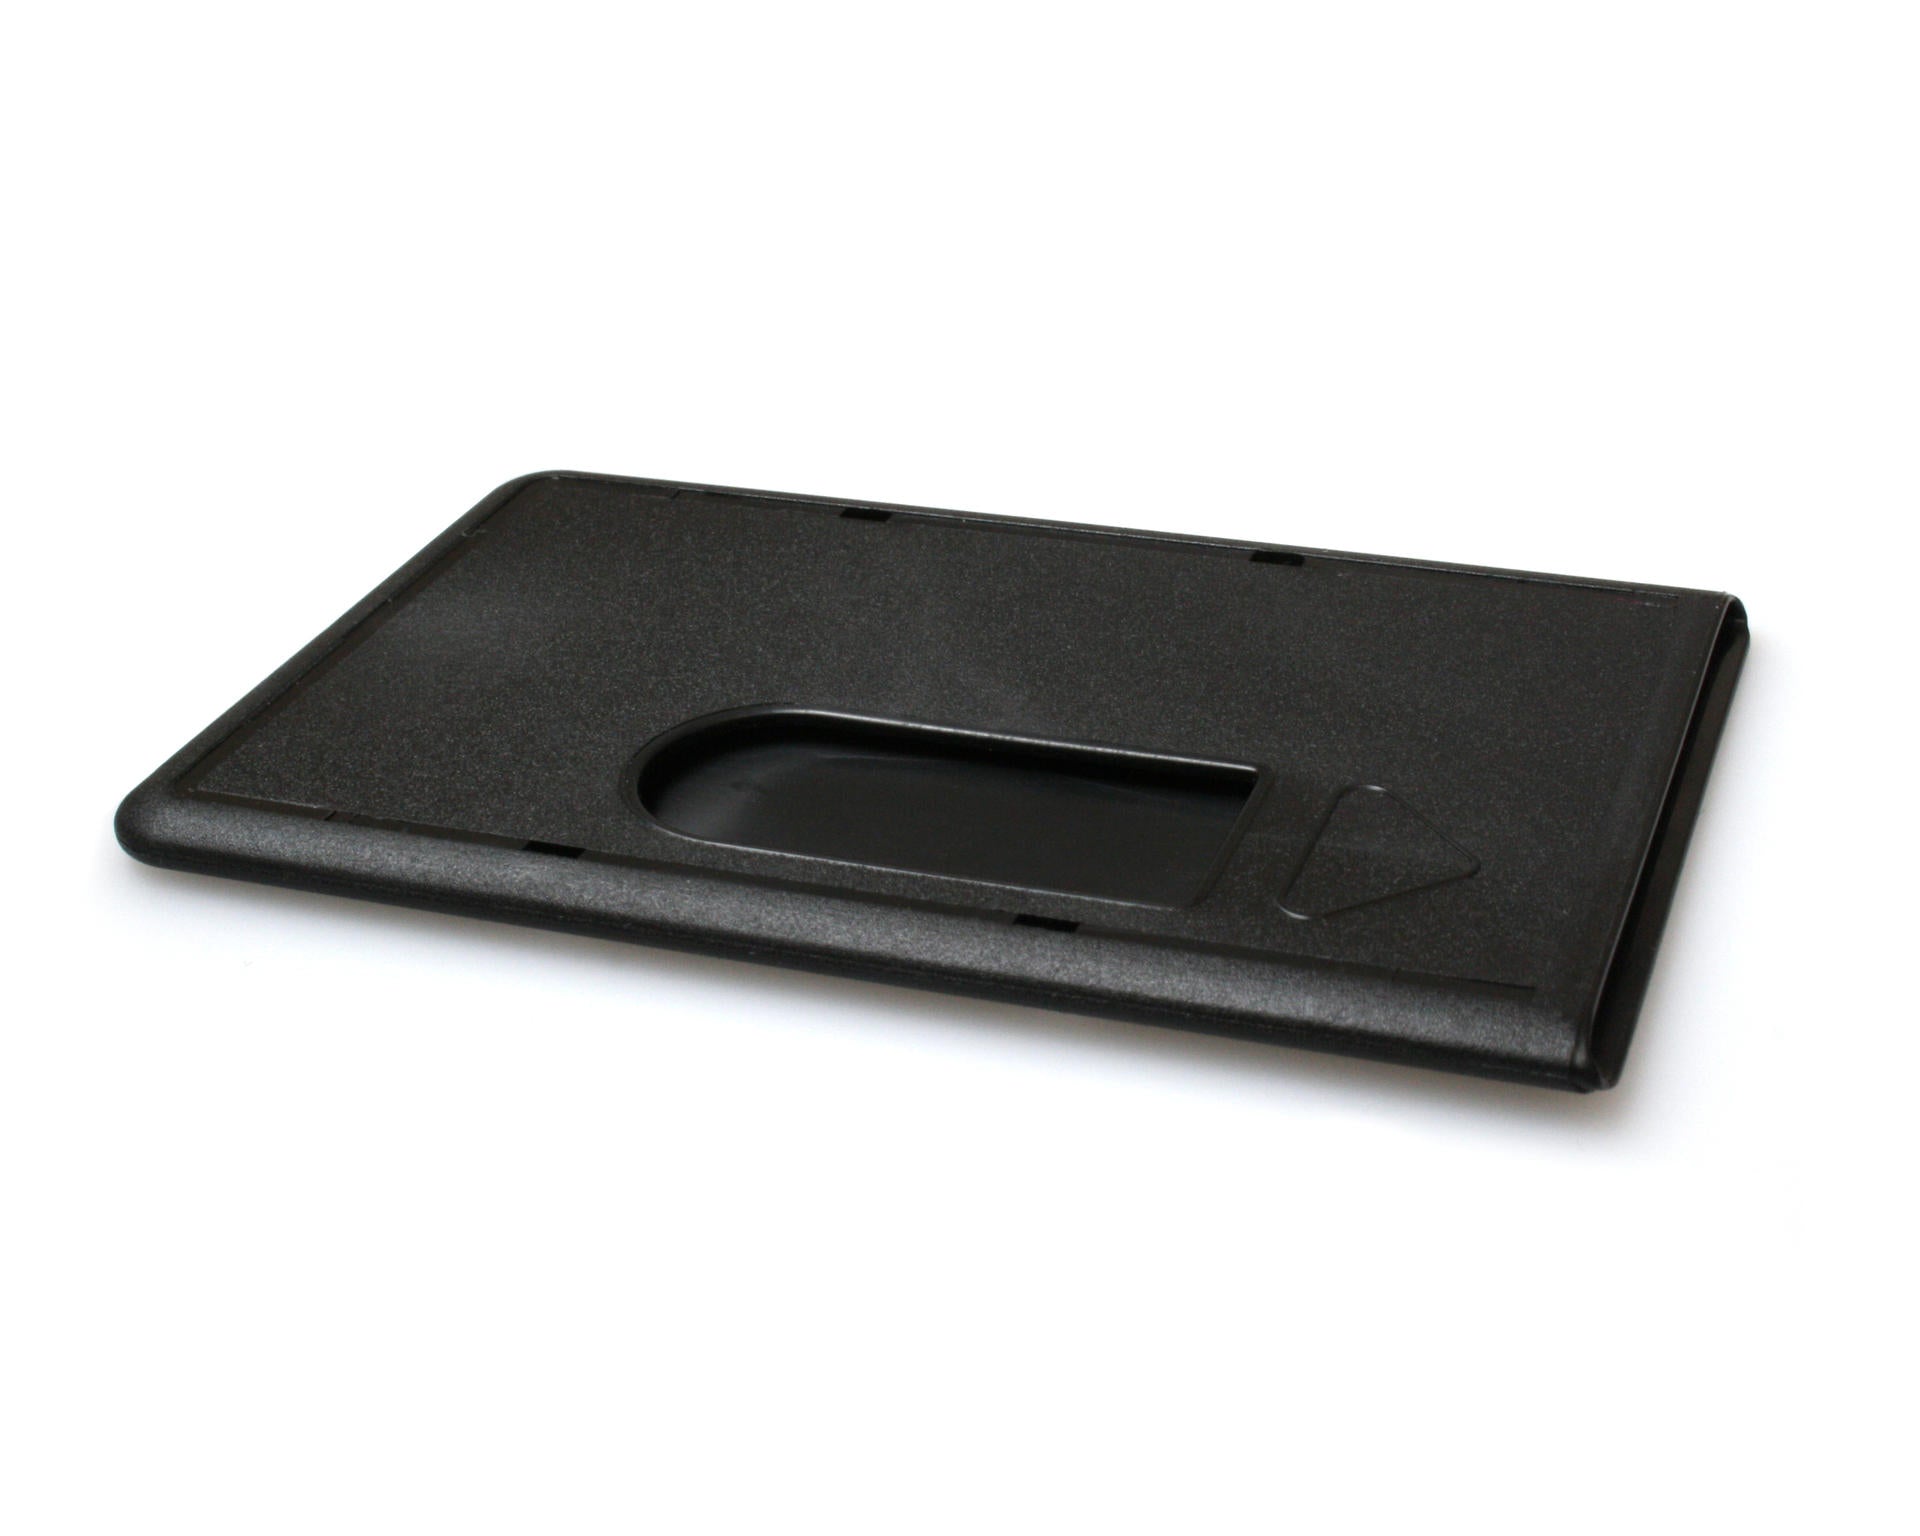 Enclosed Rigid Card Holders for use in Pocket, Frosted Black, Premium - Landscape, Horizontal (Pack of 100)